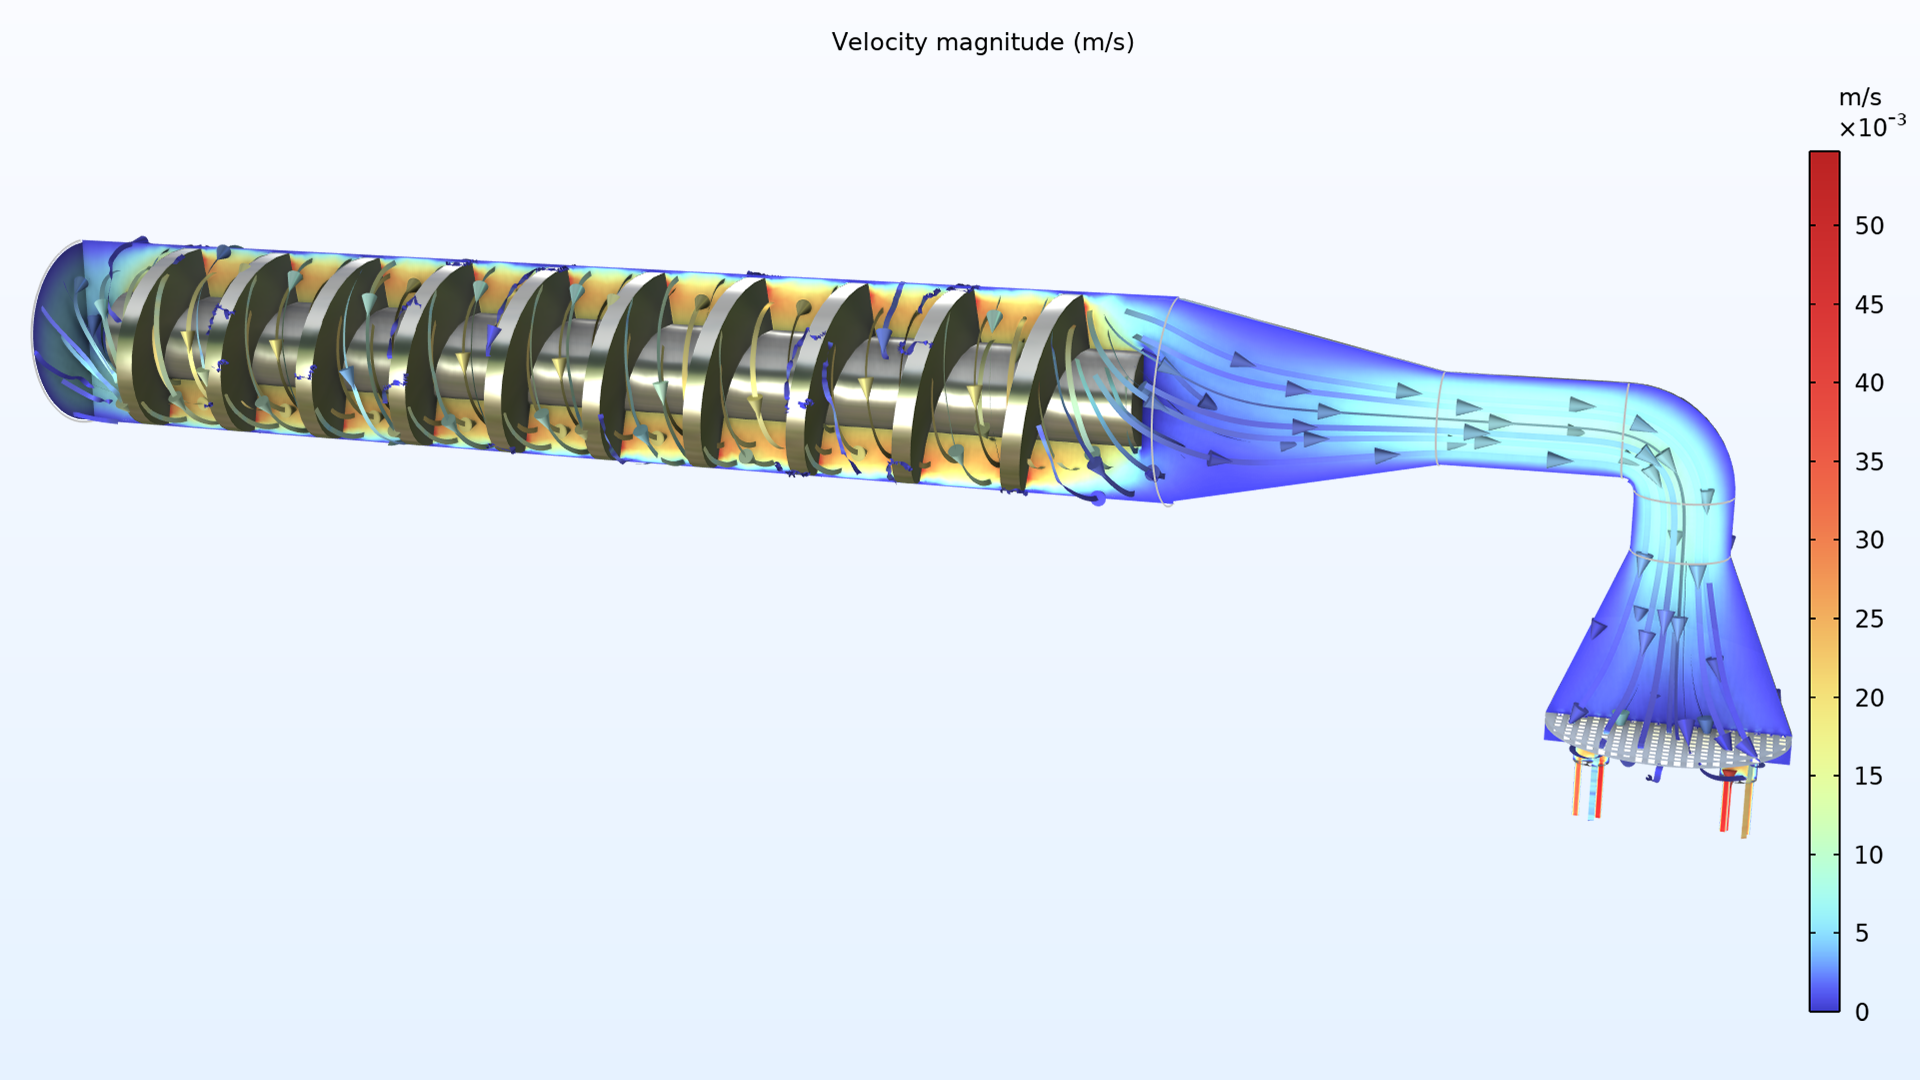 A pasta extruder model showing the velocity profile in rainbow, where the left end of the model is dark blue; the middle is yellow, orange, and blue; and the neck of the nozzle is light blue, but the base and end are dark blue.